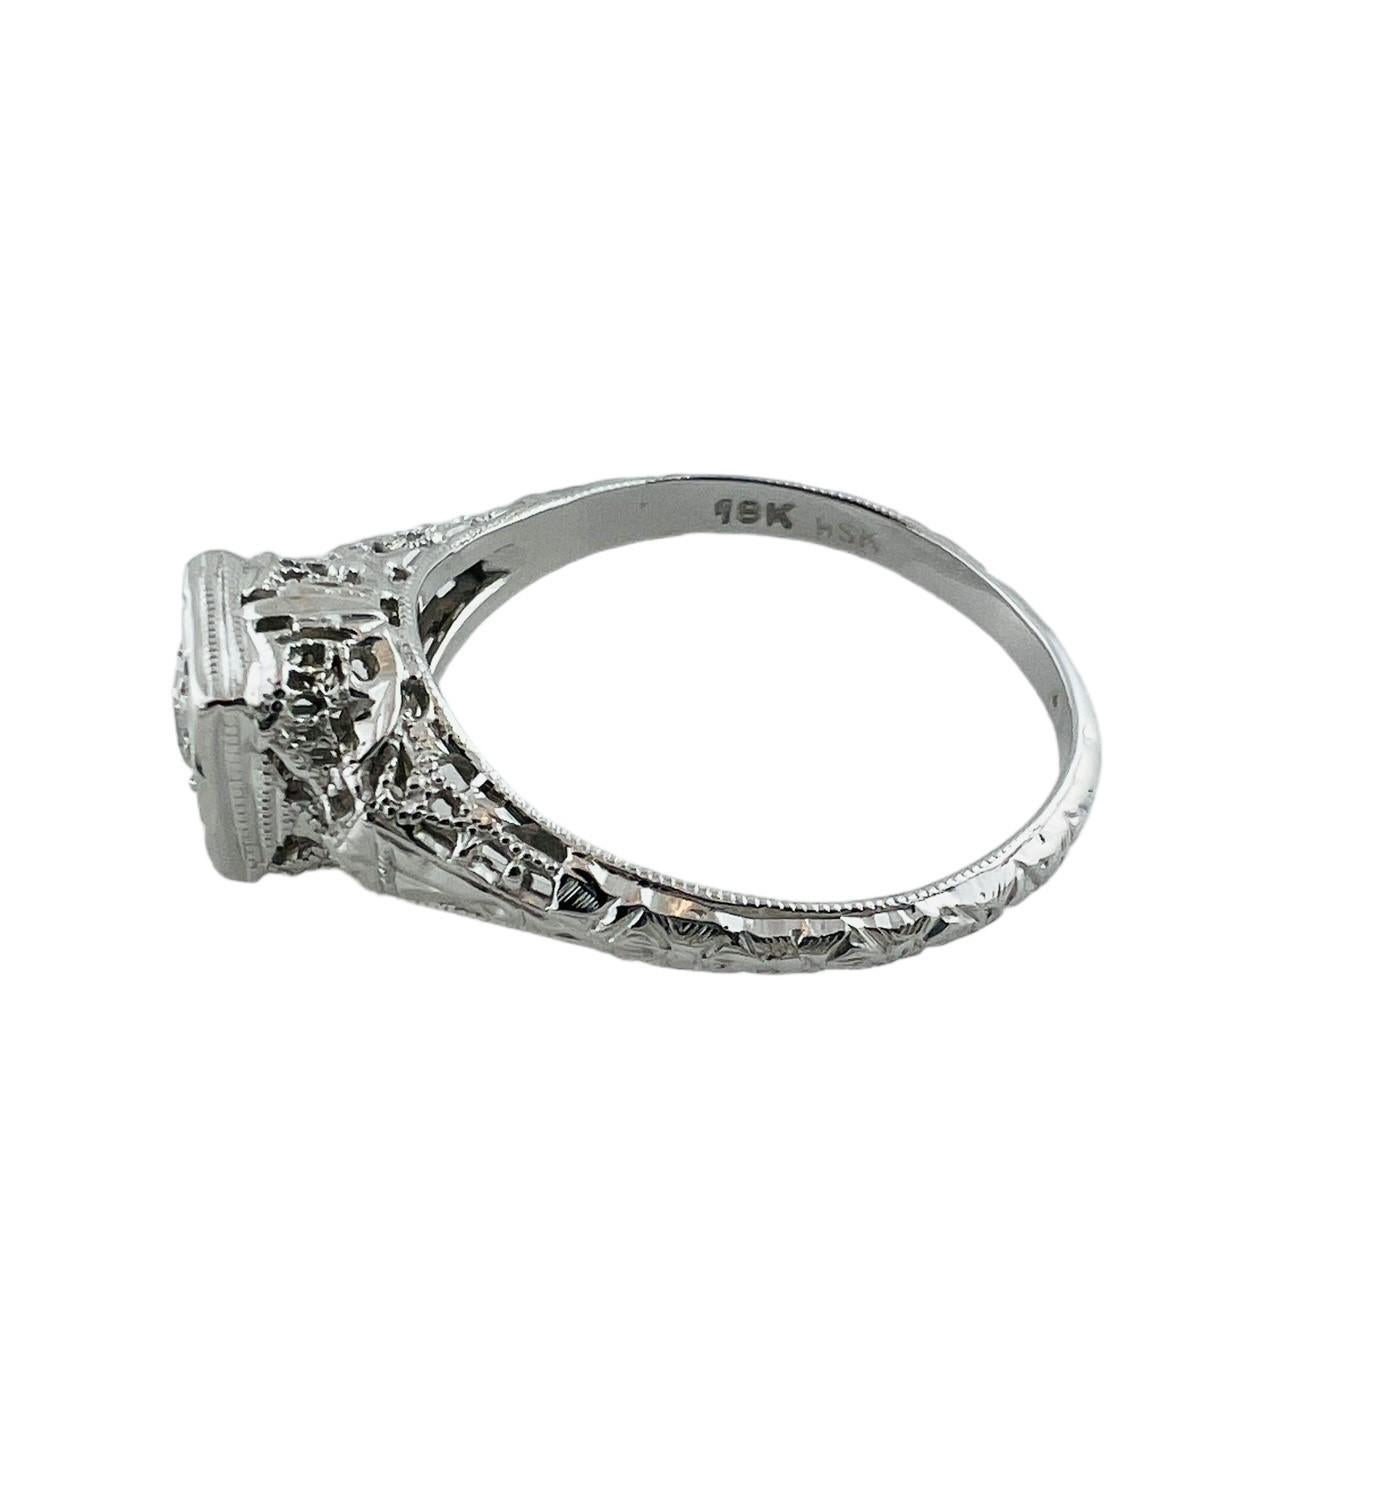 18K White Gold Diamond Filigree Ring

This beautiful vintage ring is set with single center older round brilliant diamond

Diamond is approx. 0.18cts

Diamond clarity - VVS1

Diamond color - E

Ring is a size 7

Front of ring is approx. 7.5mm in